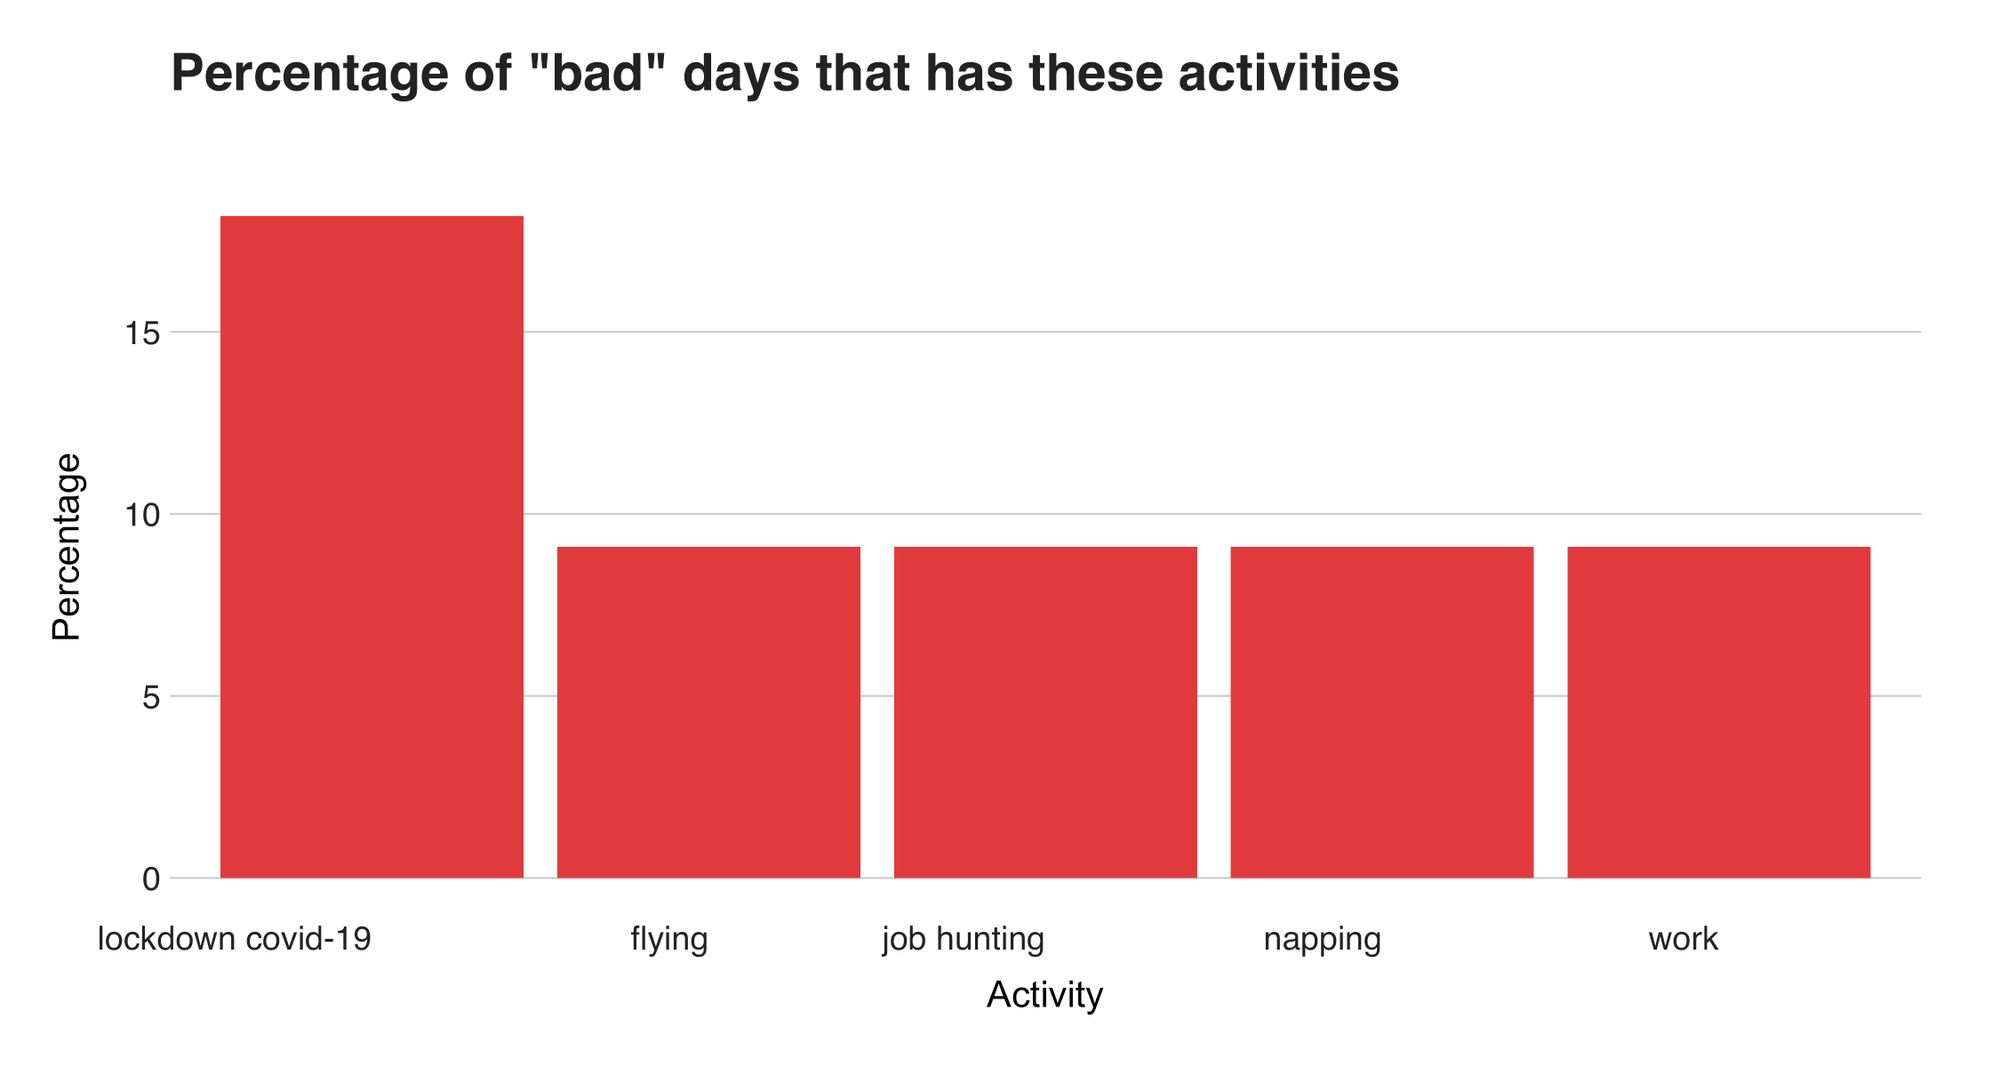 Figure 21: Percentage of "bad" days with these activities.